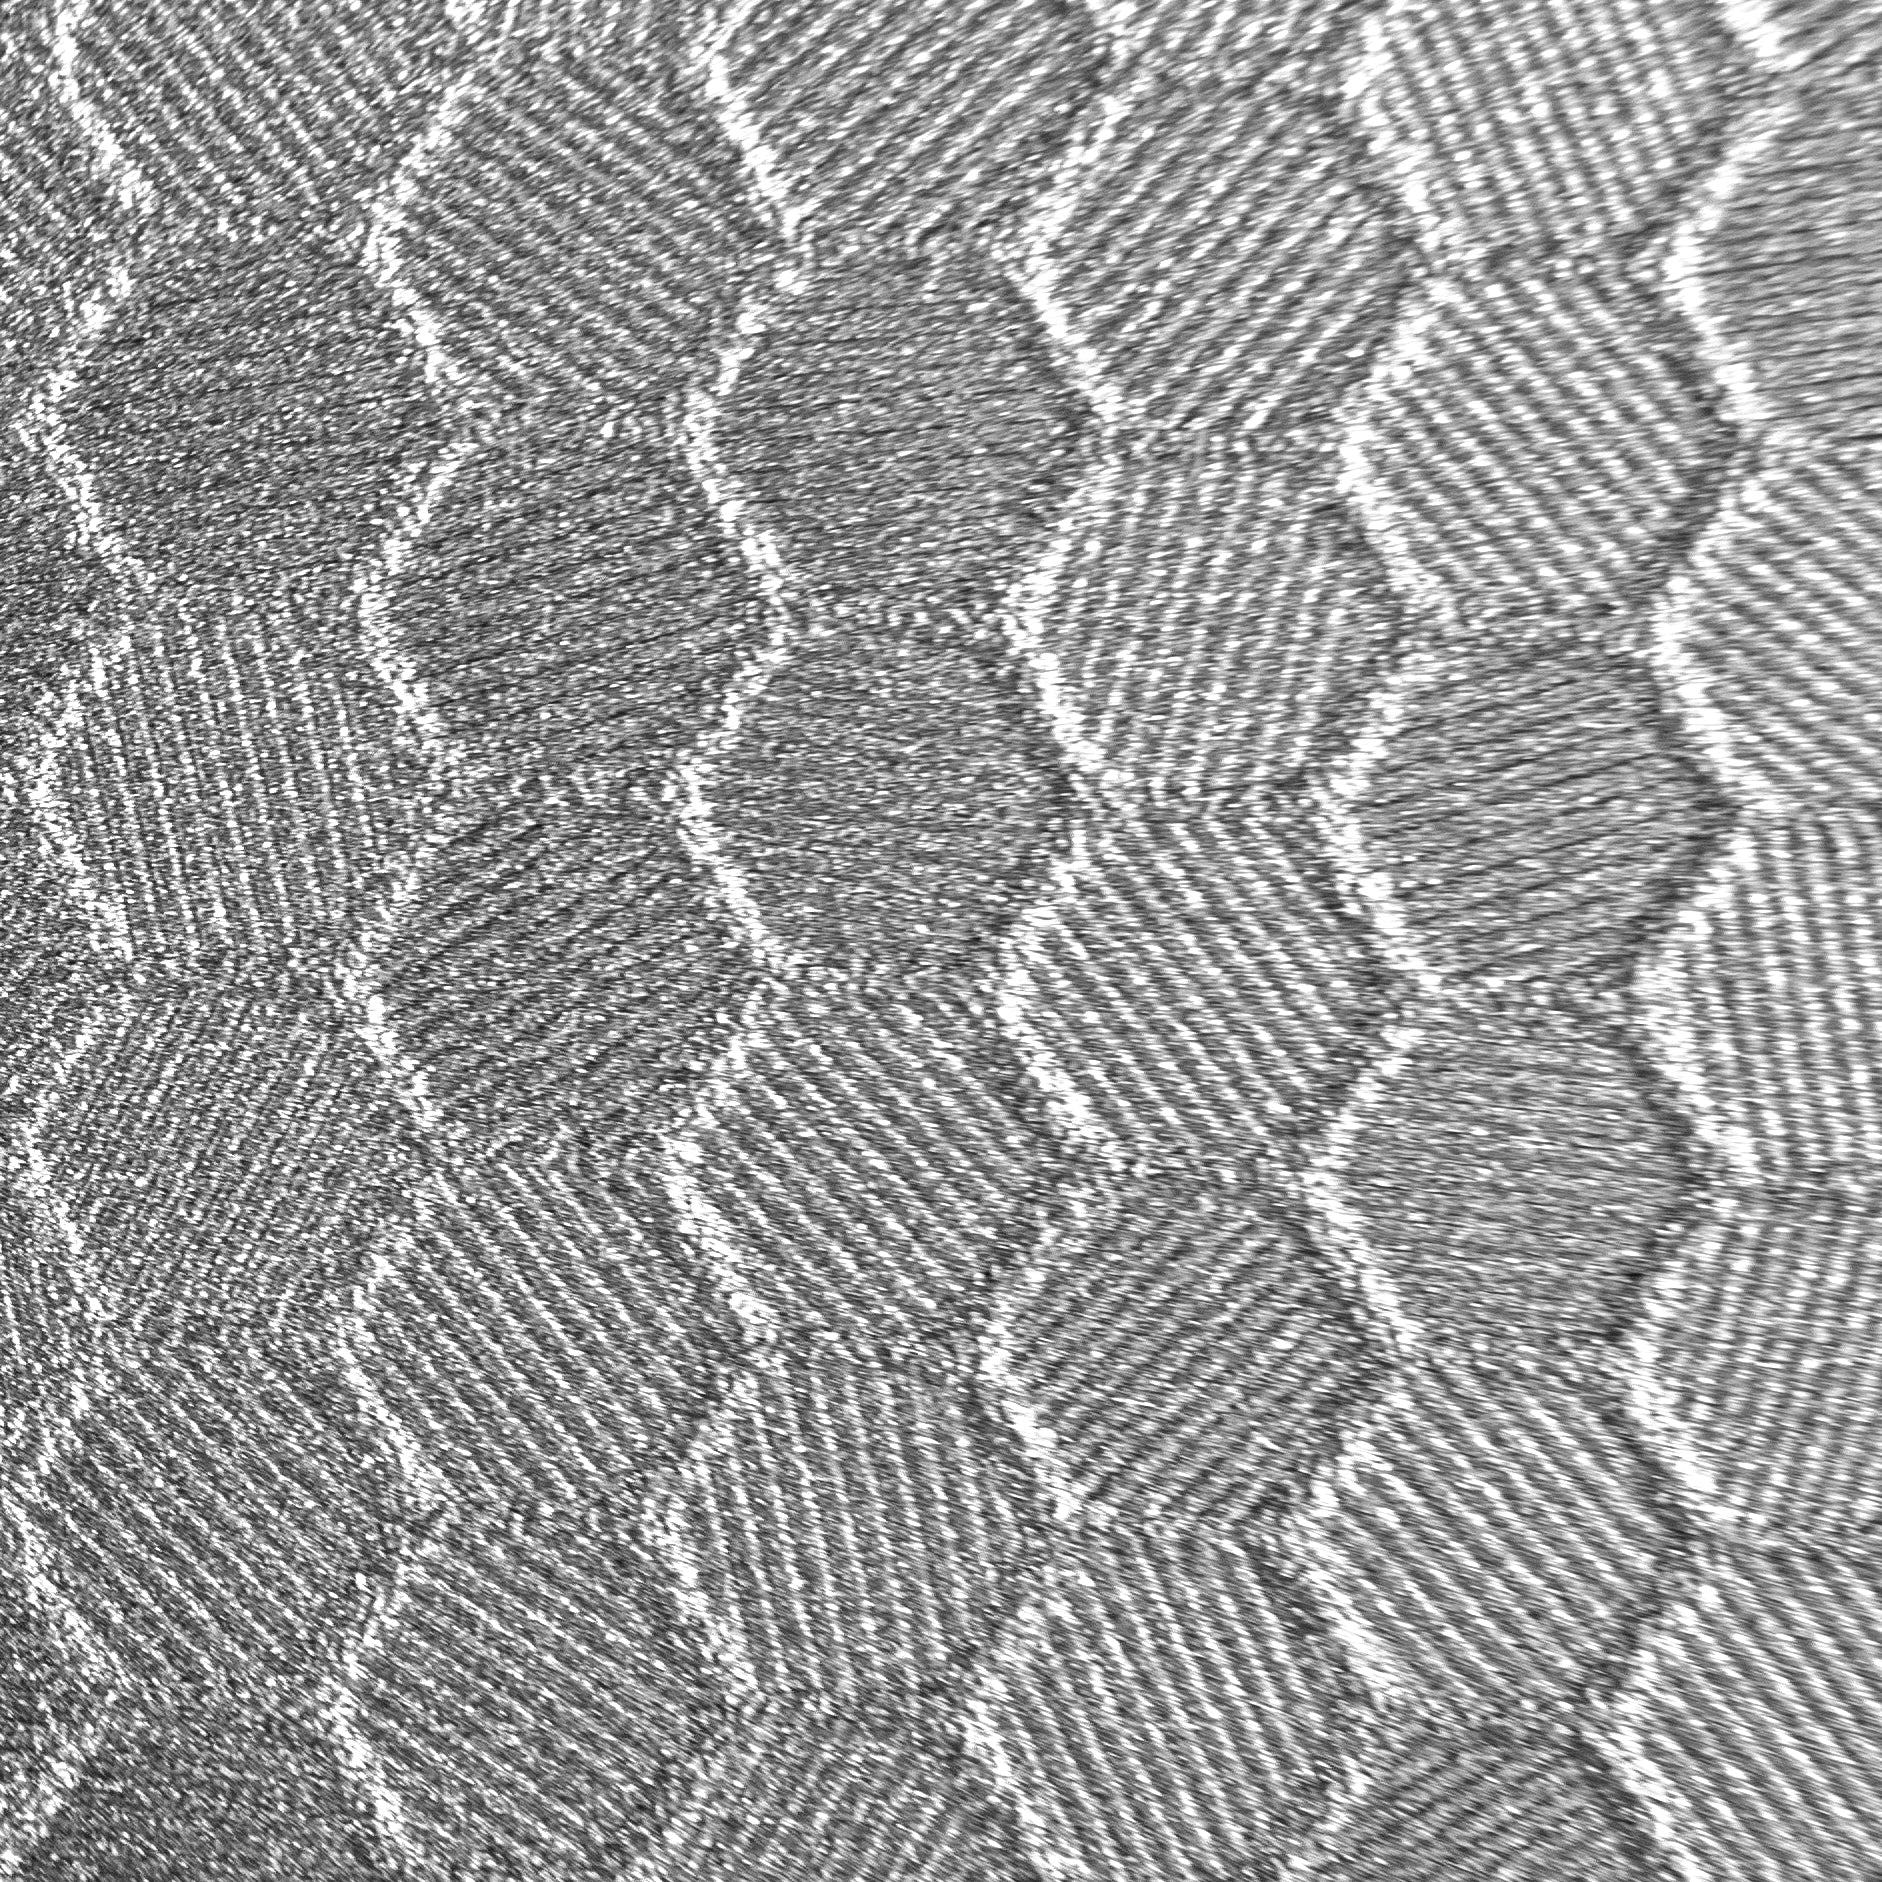 close up swatch of silver hex pattern. Hexagonal shapes with cross hatching in between 